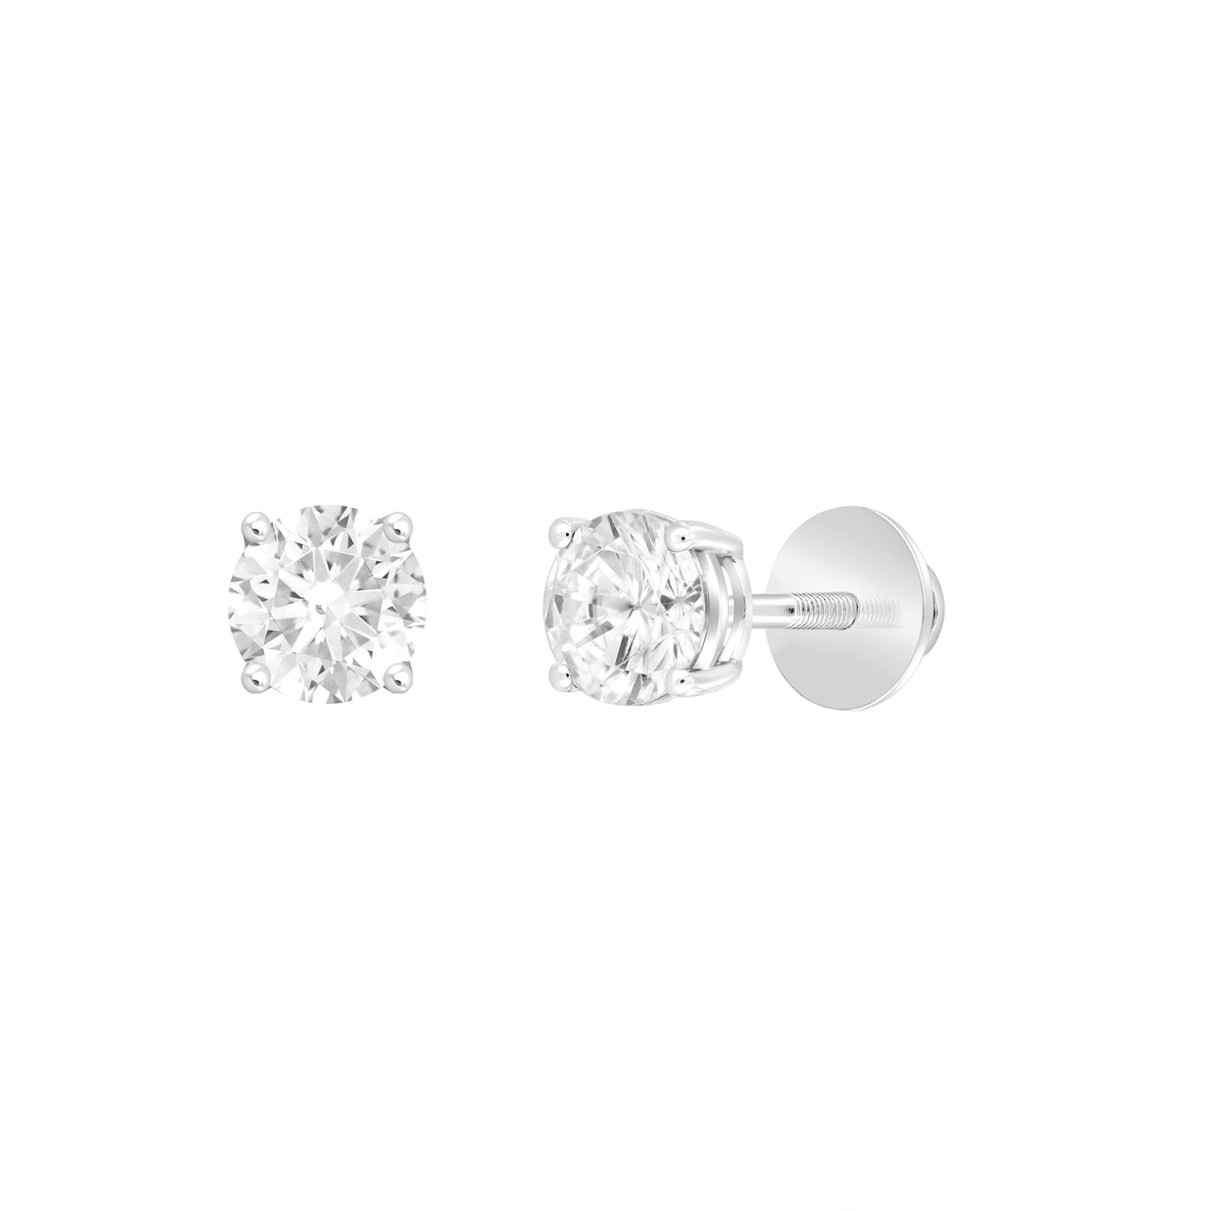 LADIES SOLITAIRE EARRINGS 1/2CT ROUND DIAMOND 14K WHITE GOLD